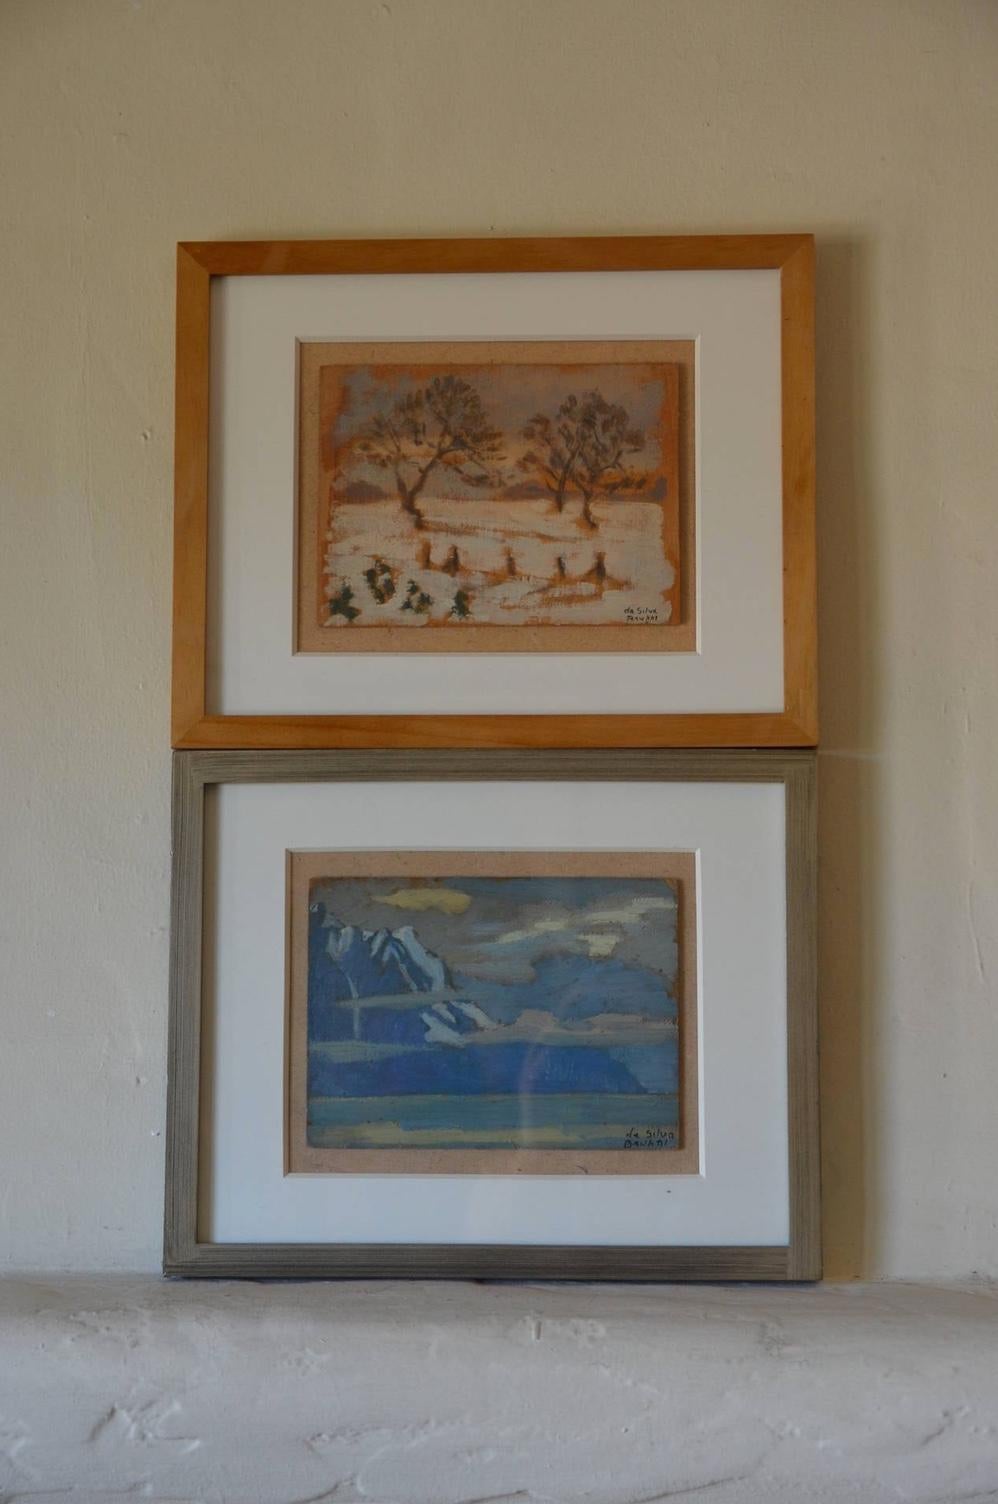 Rare set of two small framed oil paintings by Ivan da Silva Bruhns, (Paris, 1881-Antibes, 1980). Unique works. Signed. Each panel is 9 in. Measures: wide x 6.5 in. tall.